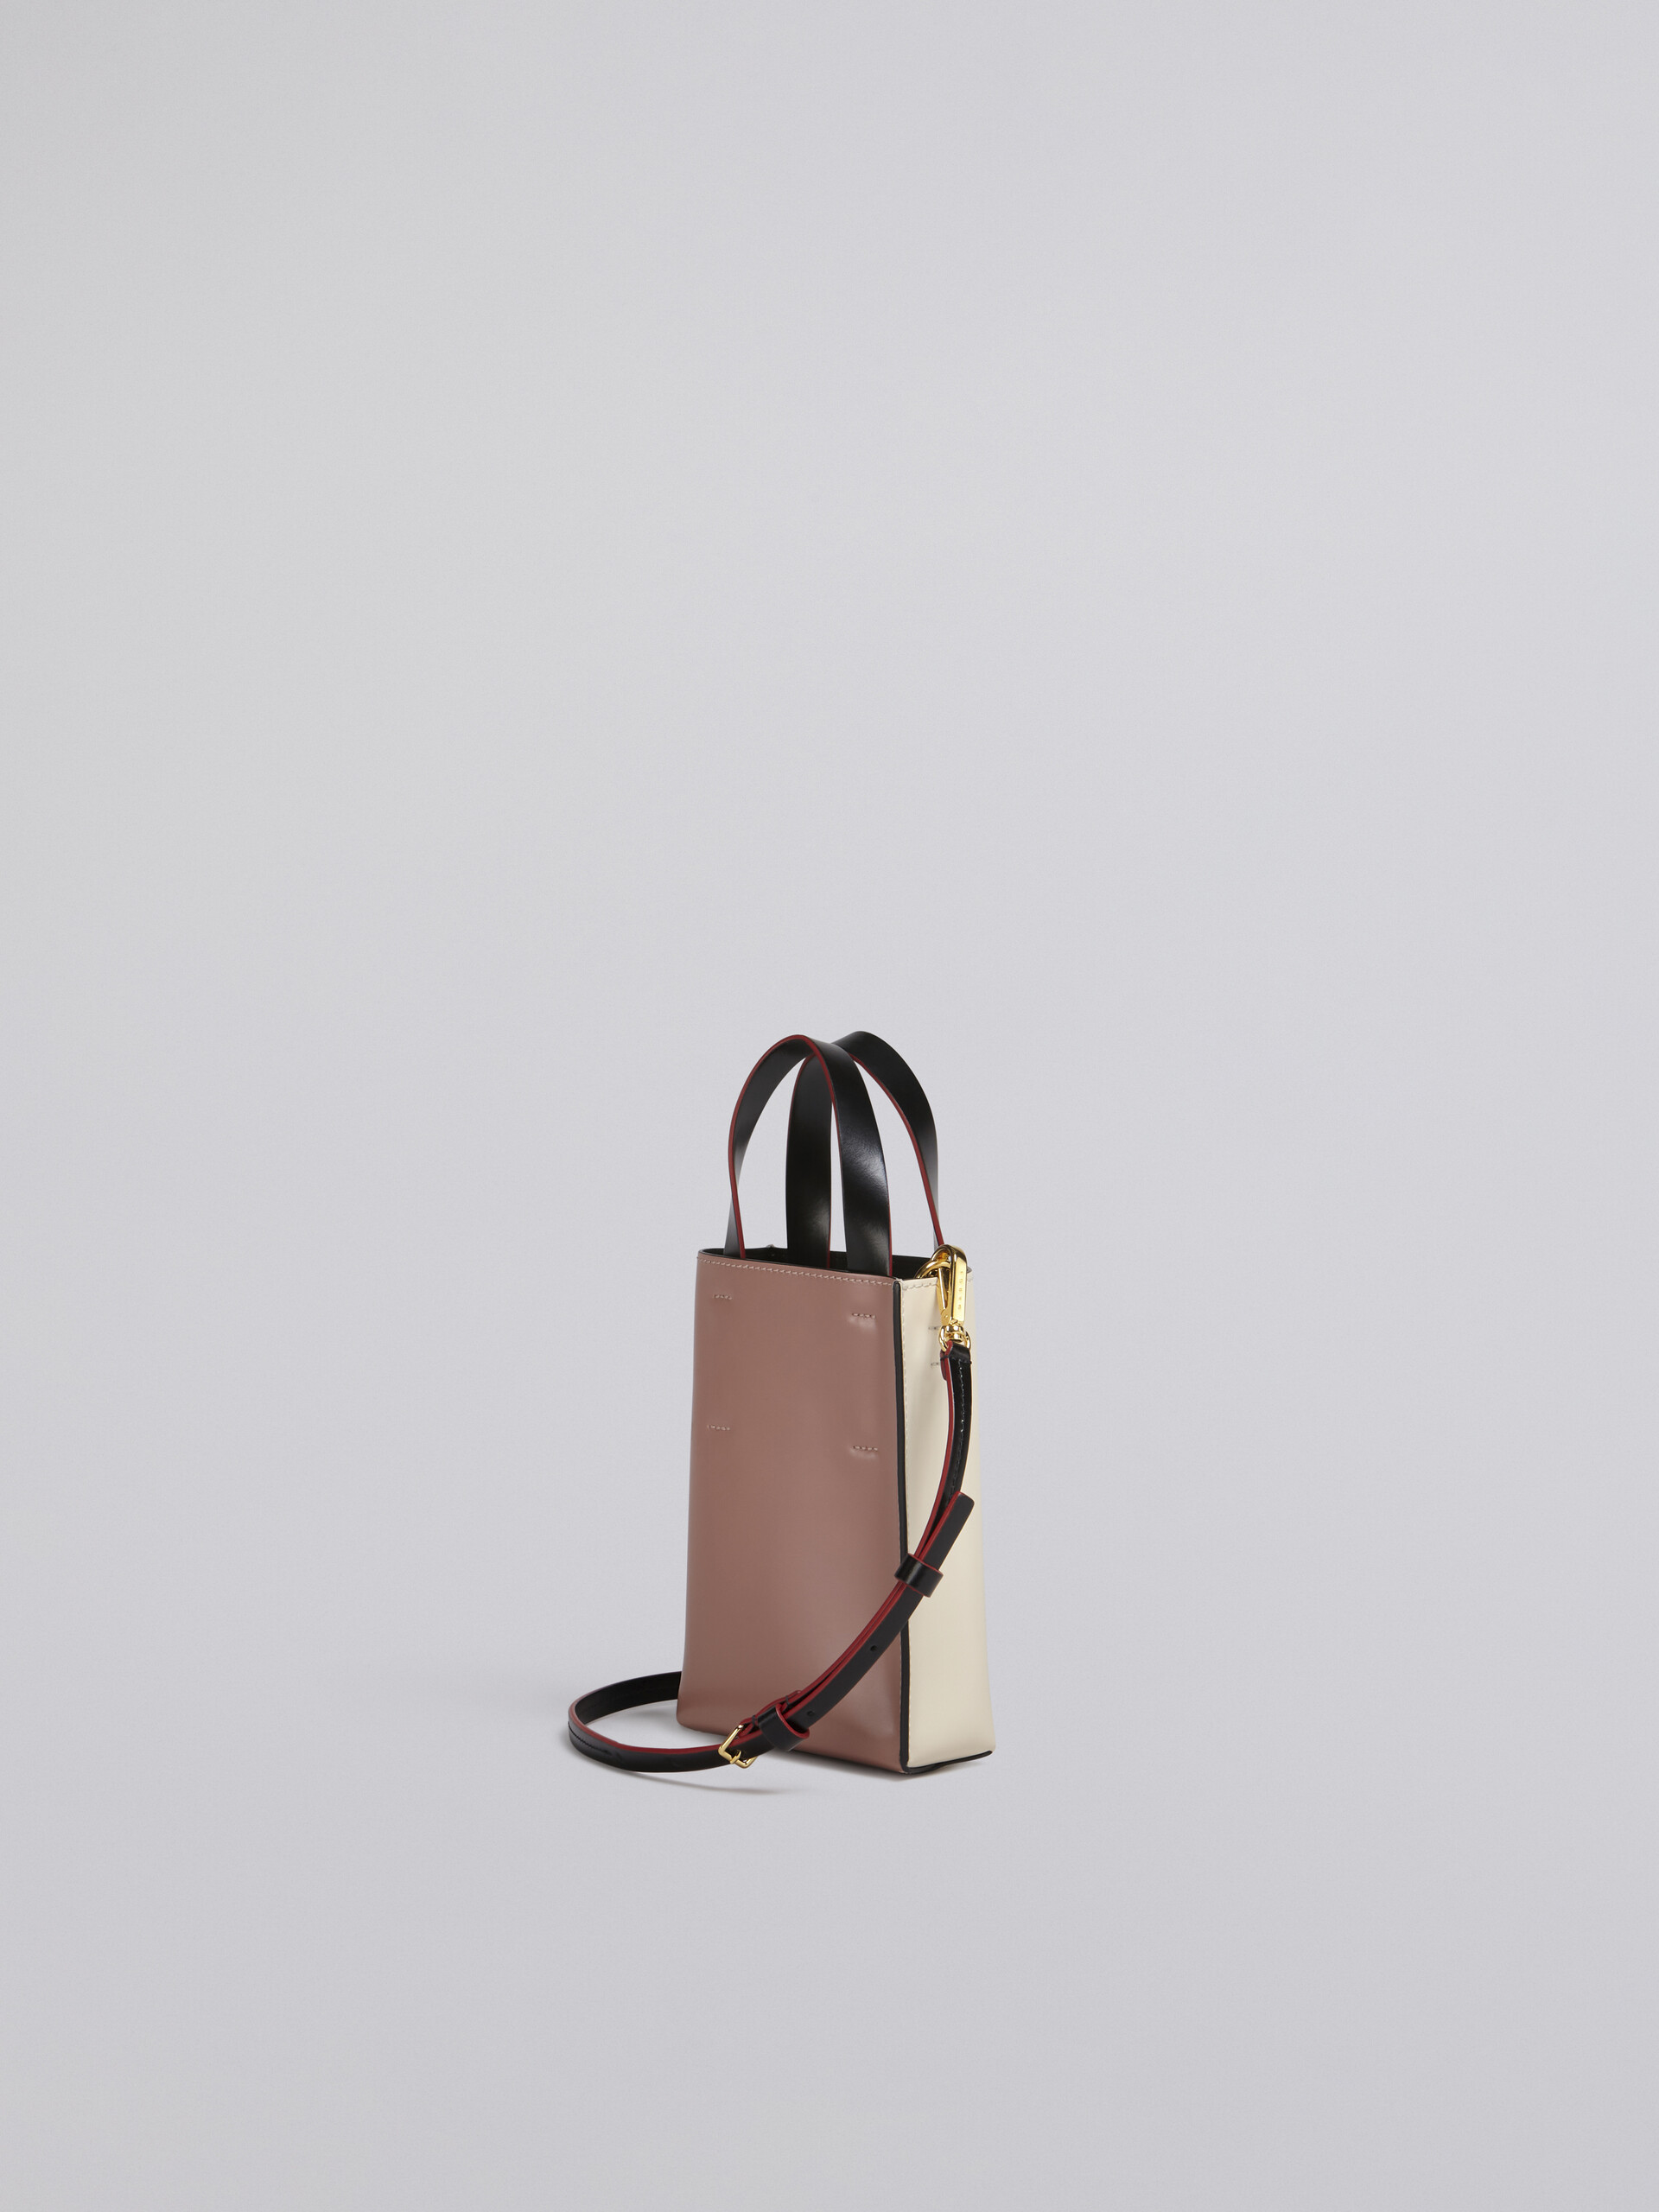 MUSEO nano bag in beige and pink shiny leather - Shopping Bags - Image 2